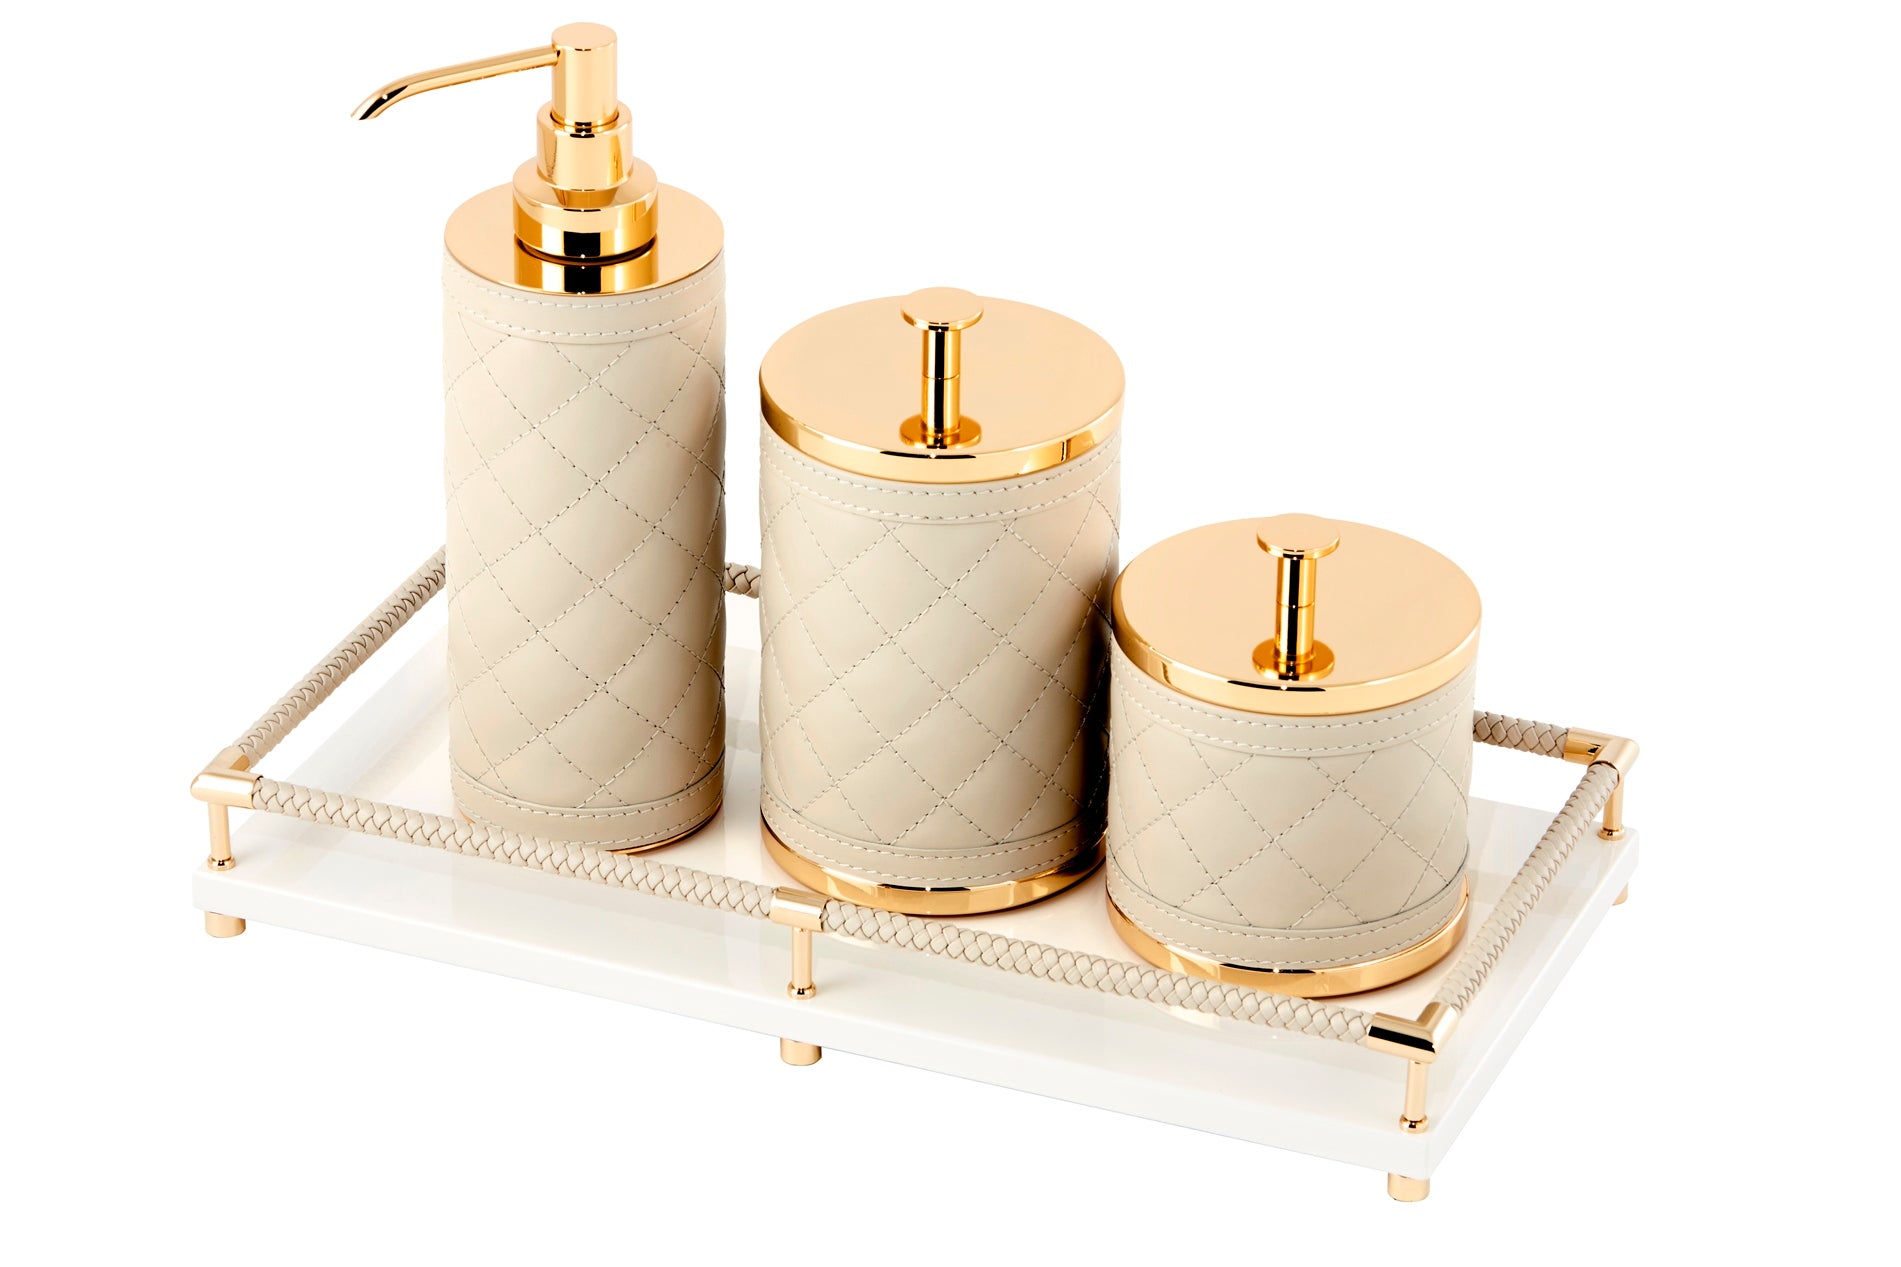 Riviere Alghero Diamonds Leather Tall Soap Dispenser | Covered with Quilted Diamonds Padded Leather | Features Chrome or Gold Metal Finish | Elevates Bathroom Decor with Luxurious Style